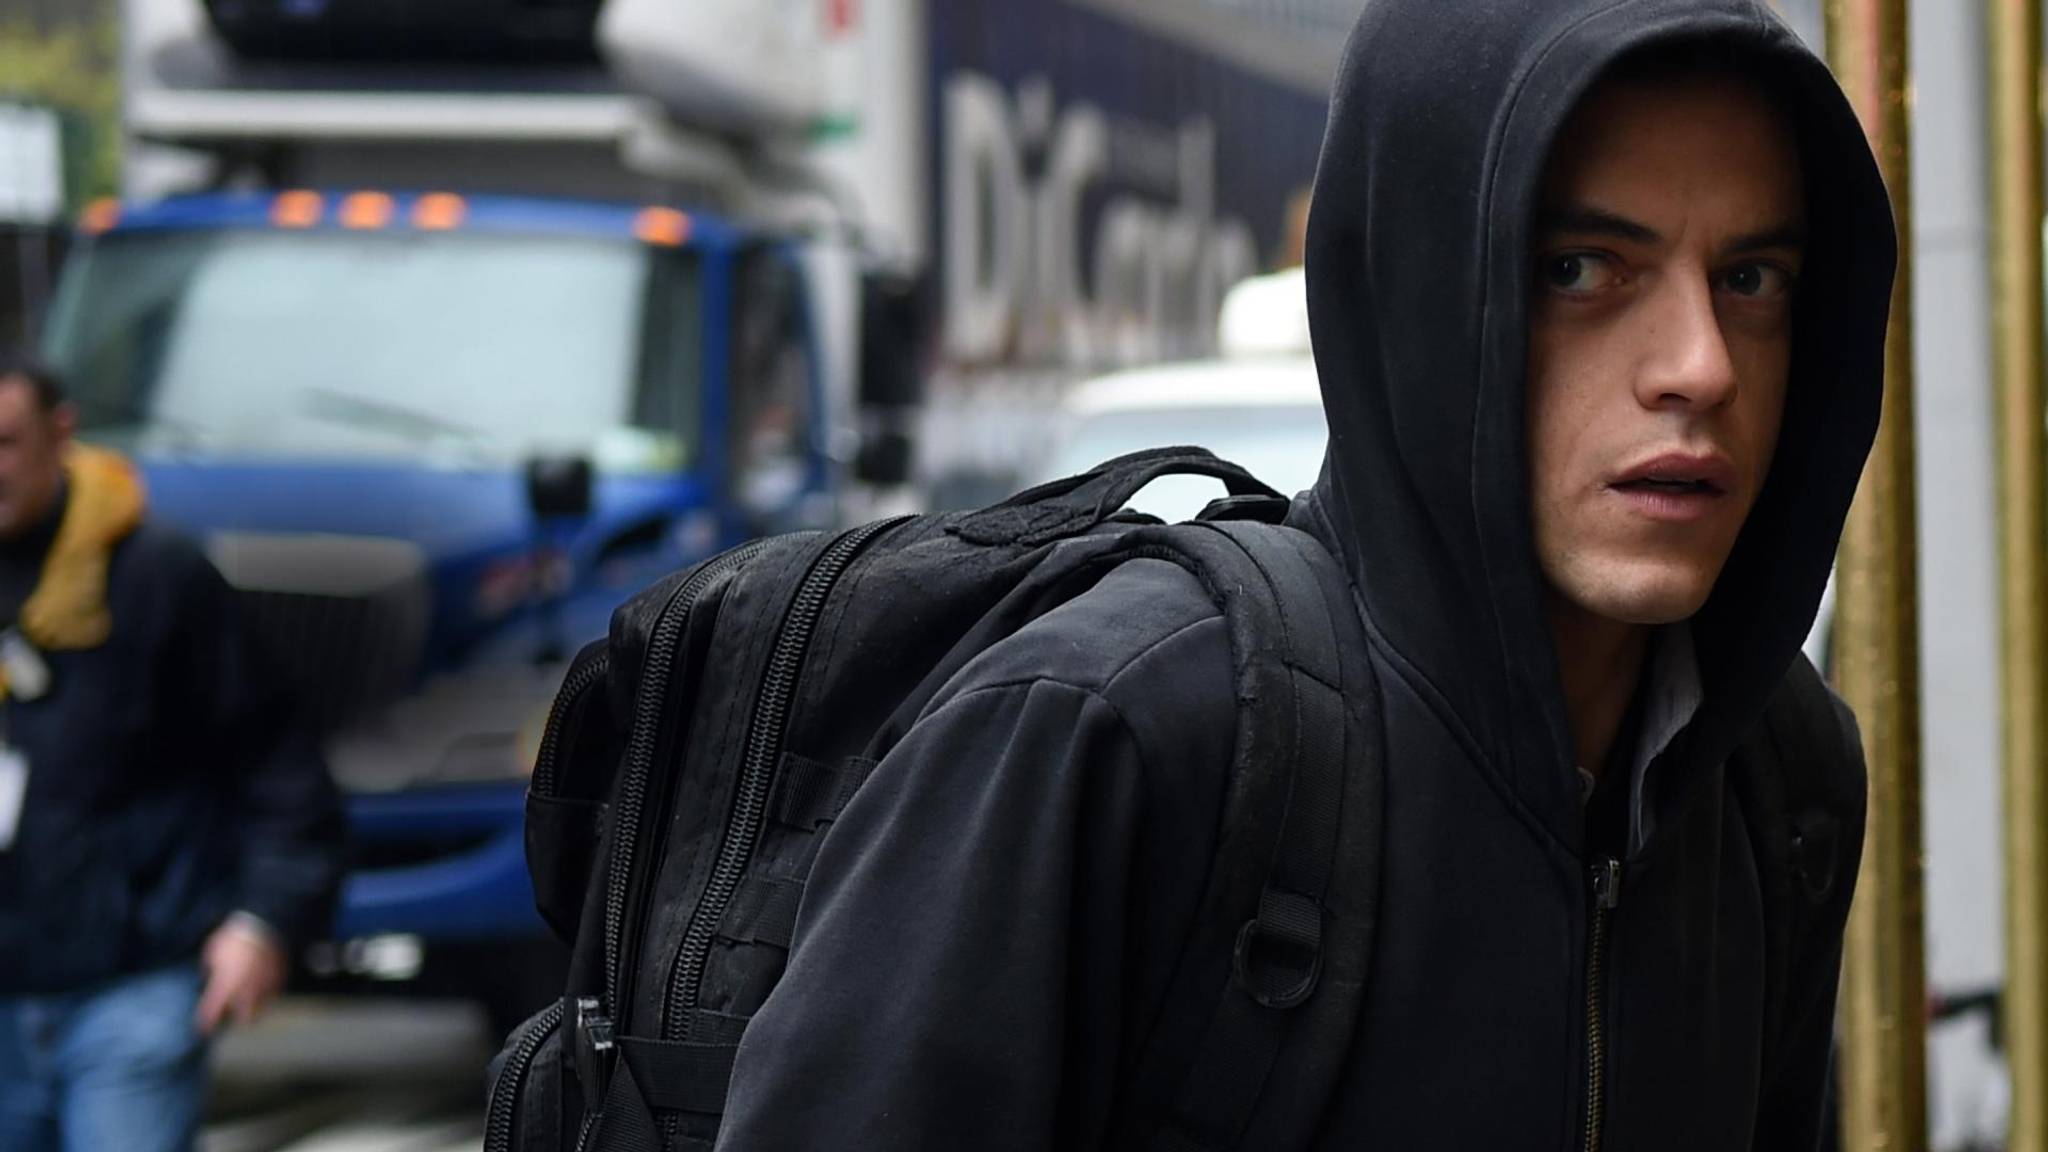 Mr. Robot's surprise release wins over viewers